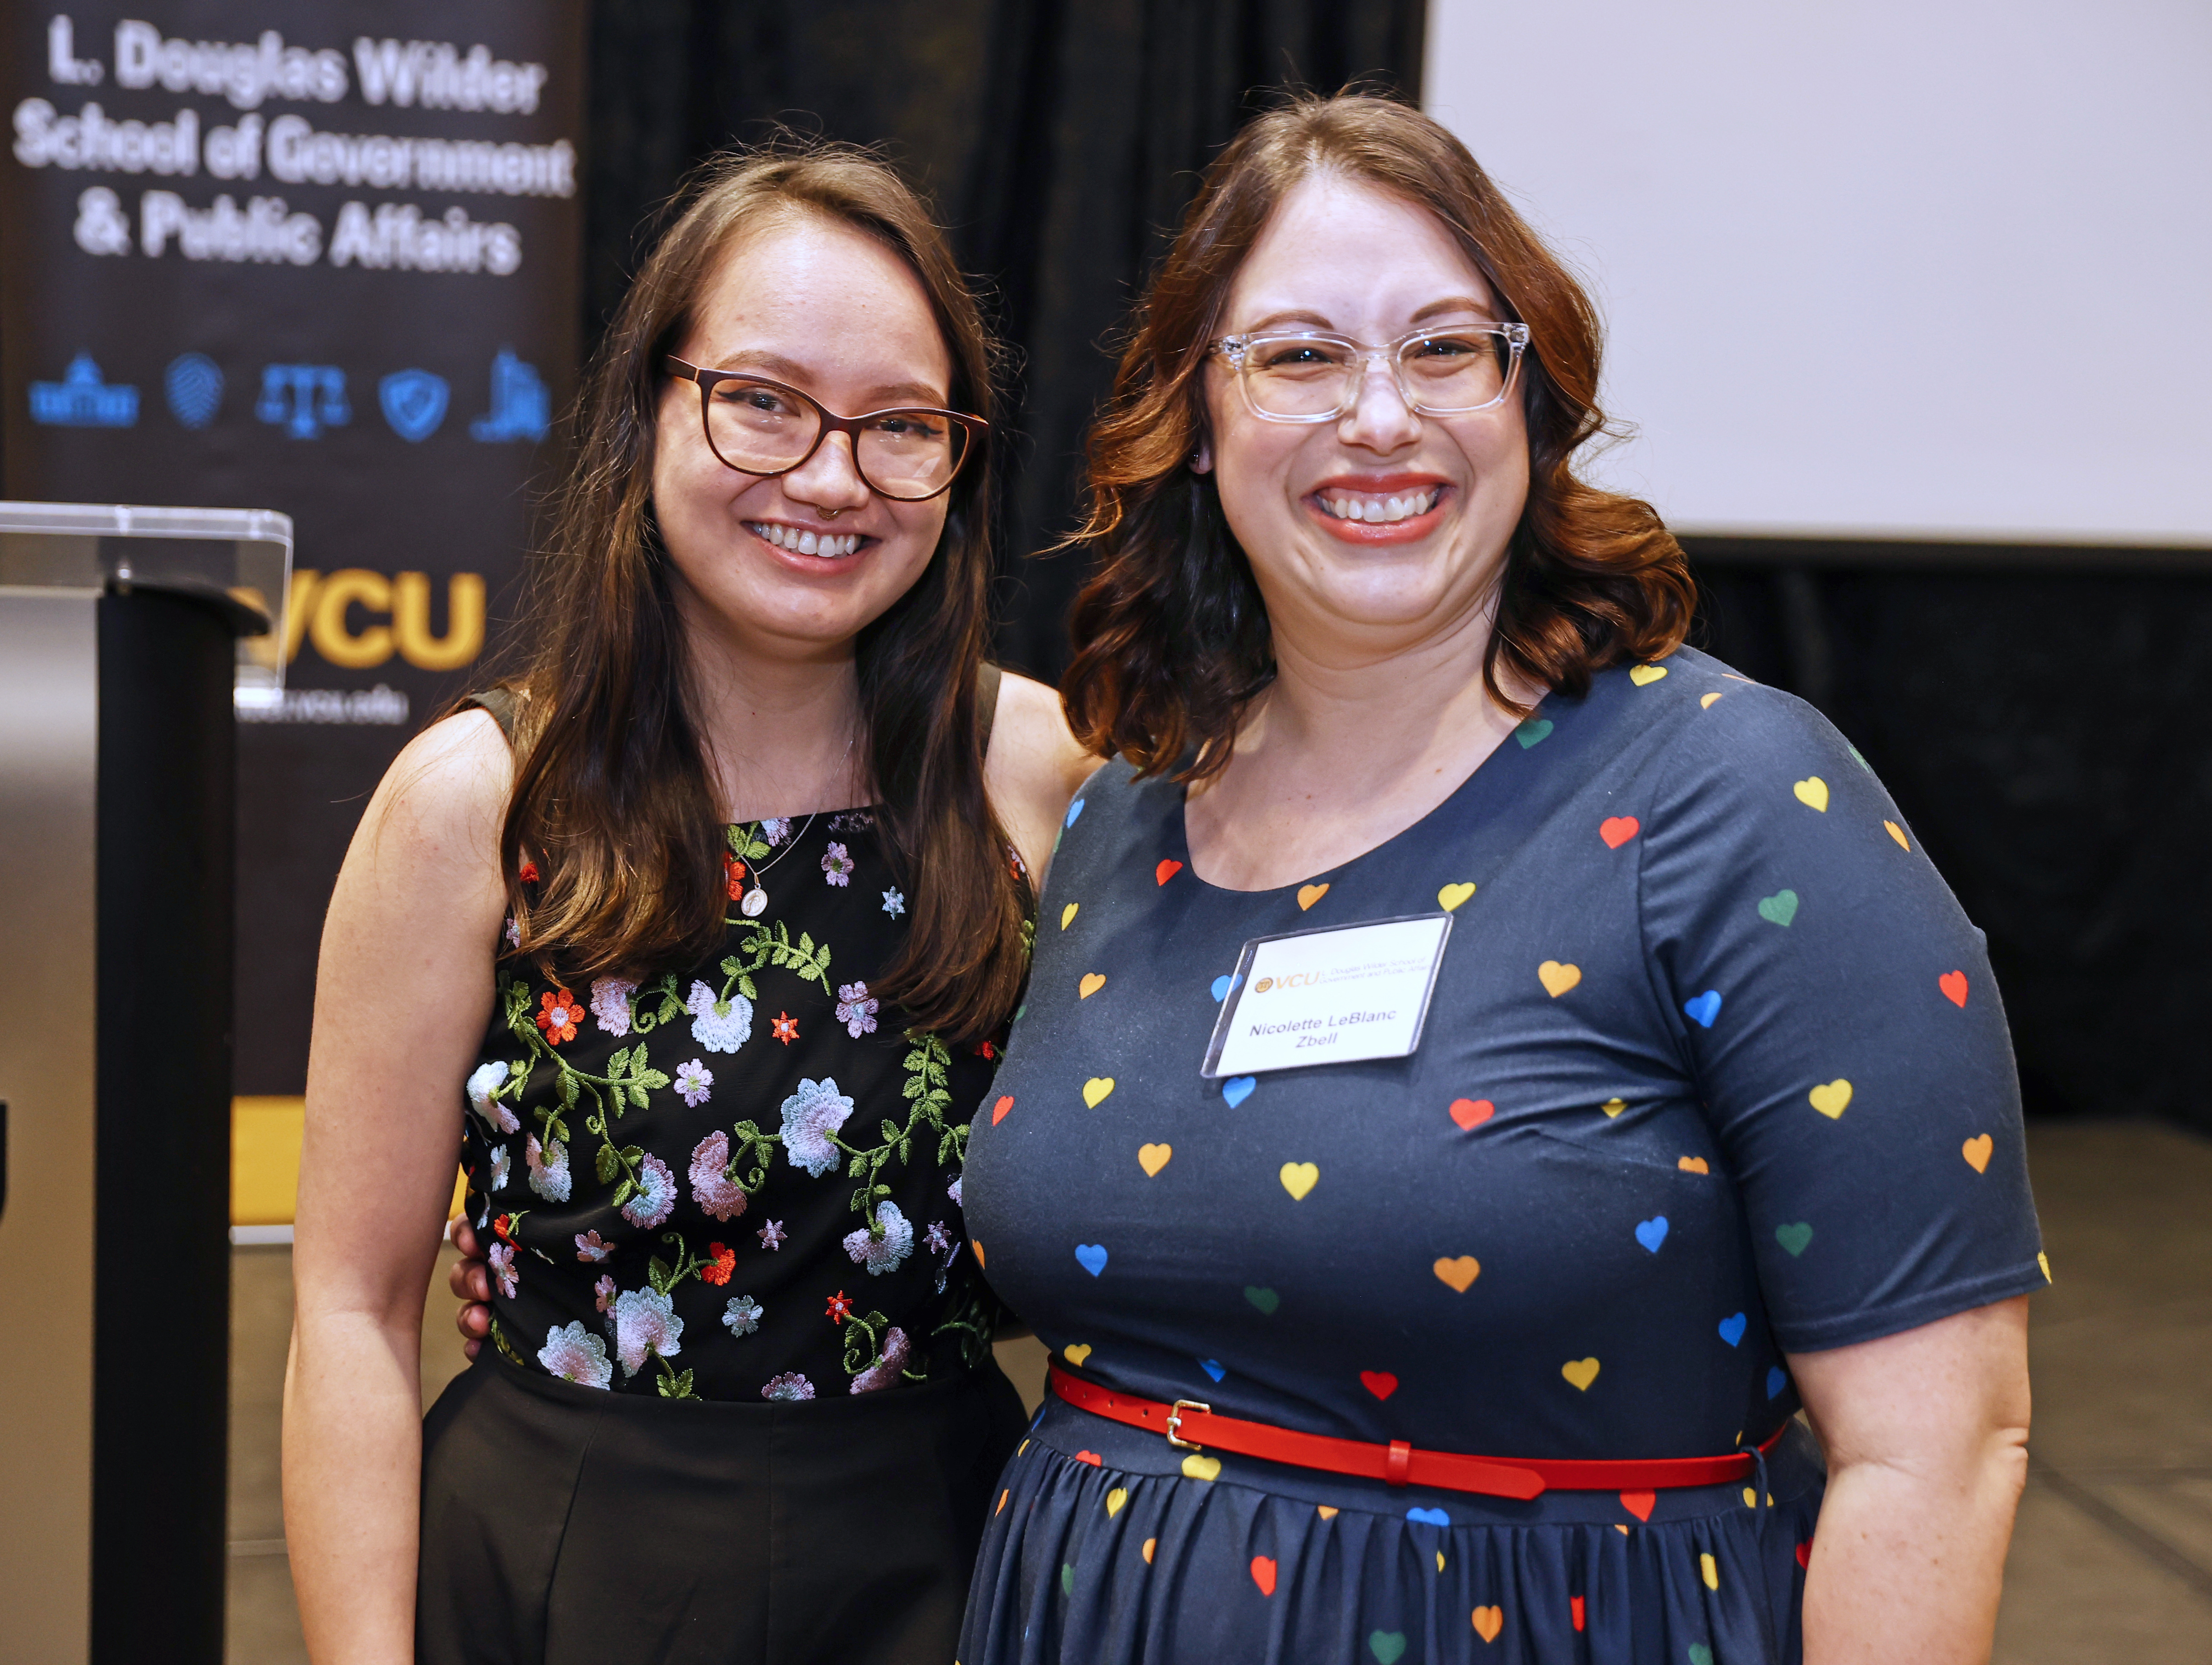 Nicolette Zbell (at right) enjoys working with students to help them “overcome, work around or bypass,” any barriers along their paths to earning their degree. Here she poses with Diana Hall (Urban & Regional Studies) at the Wilder School May 2023 Commencement.